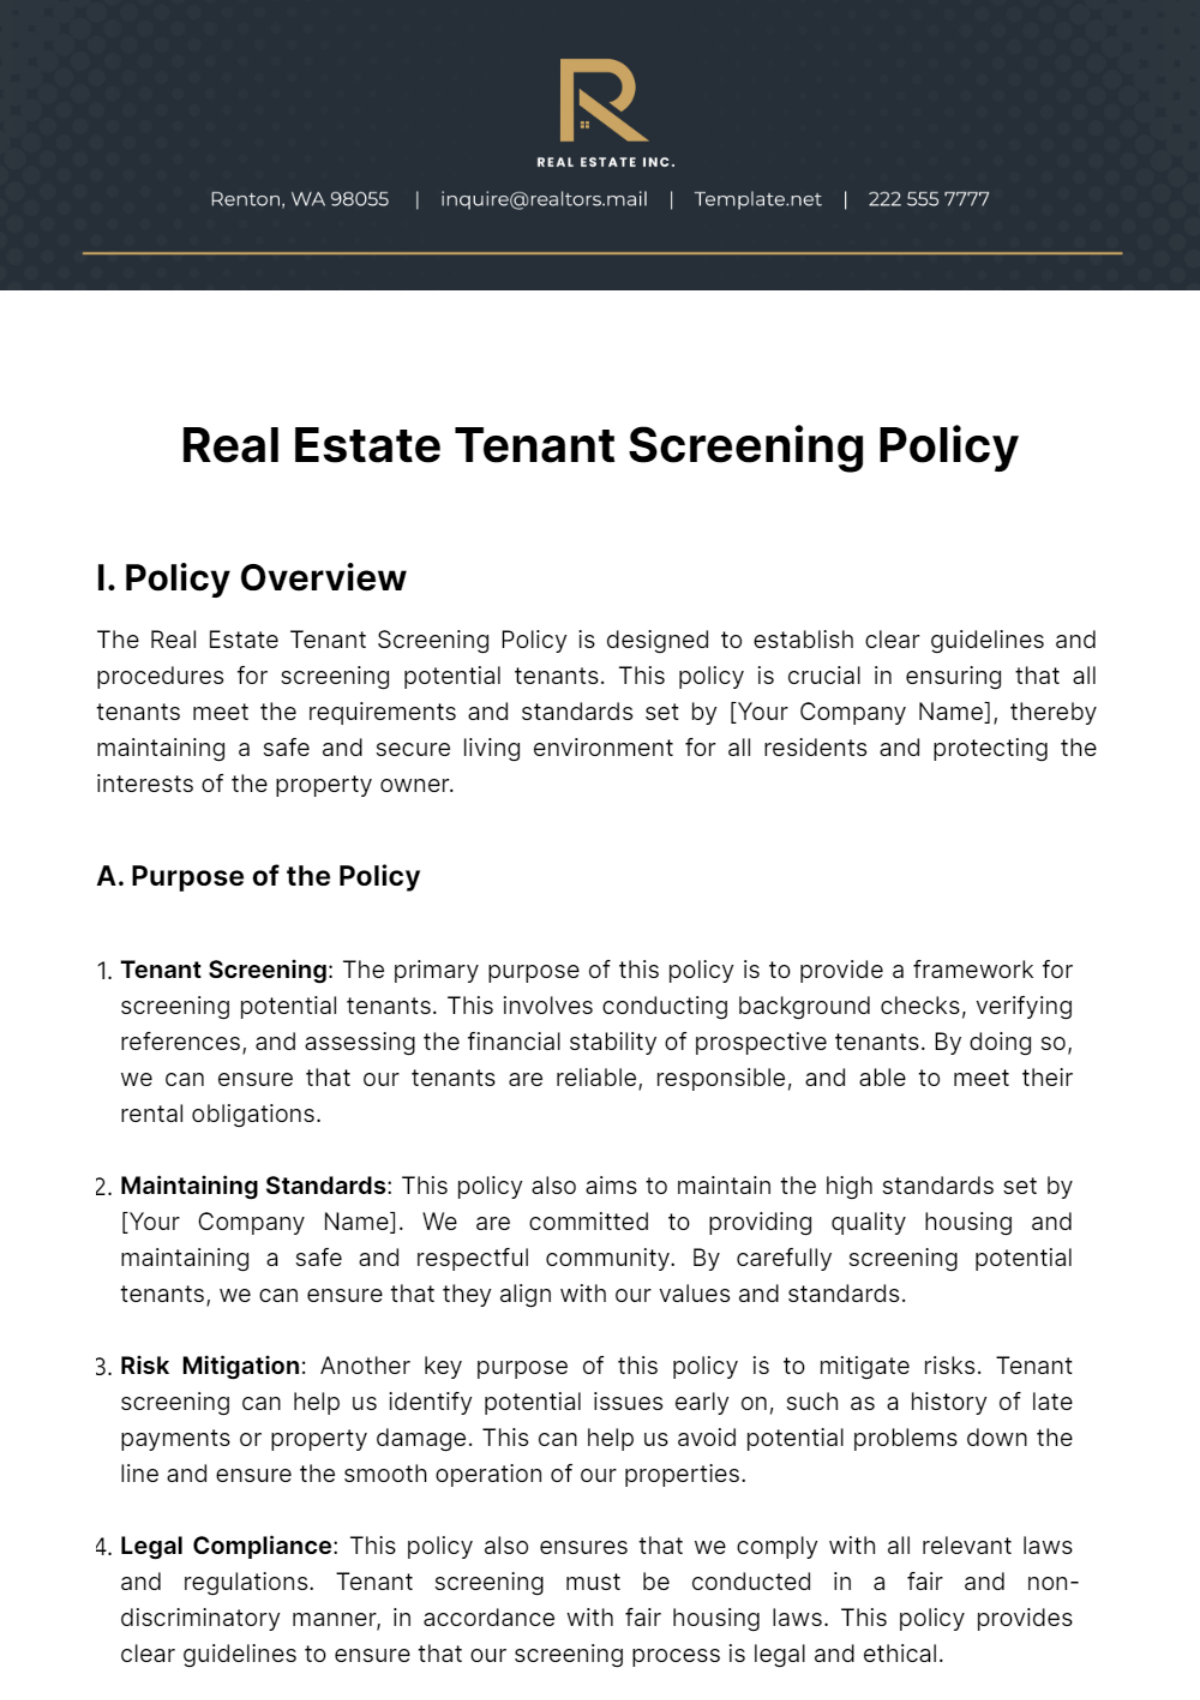 Real Estate Tenant Screening Policy Template